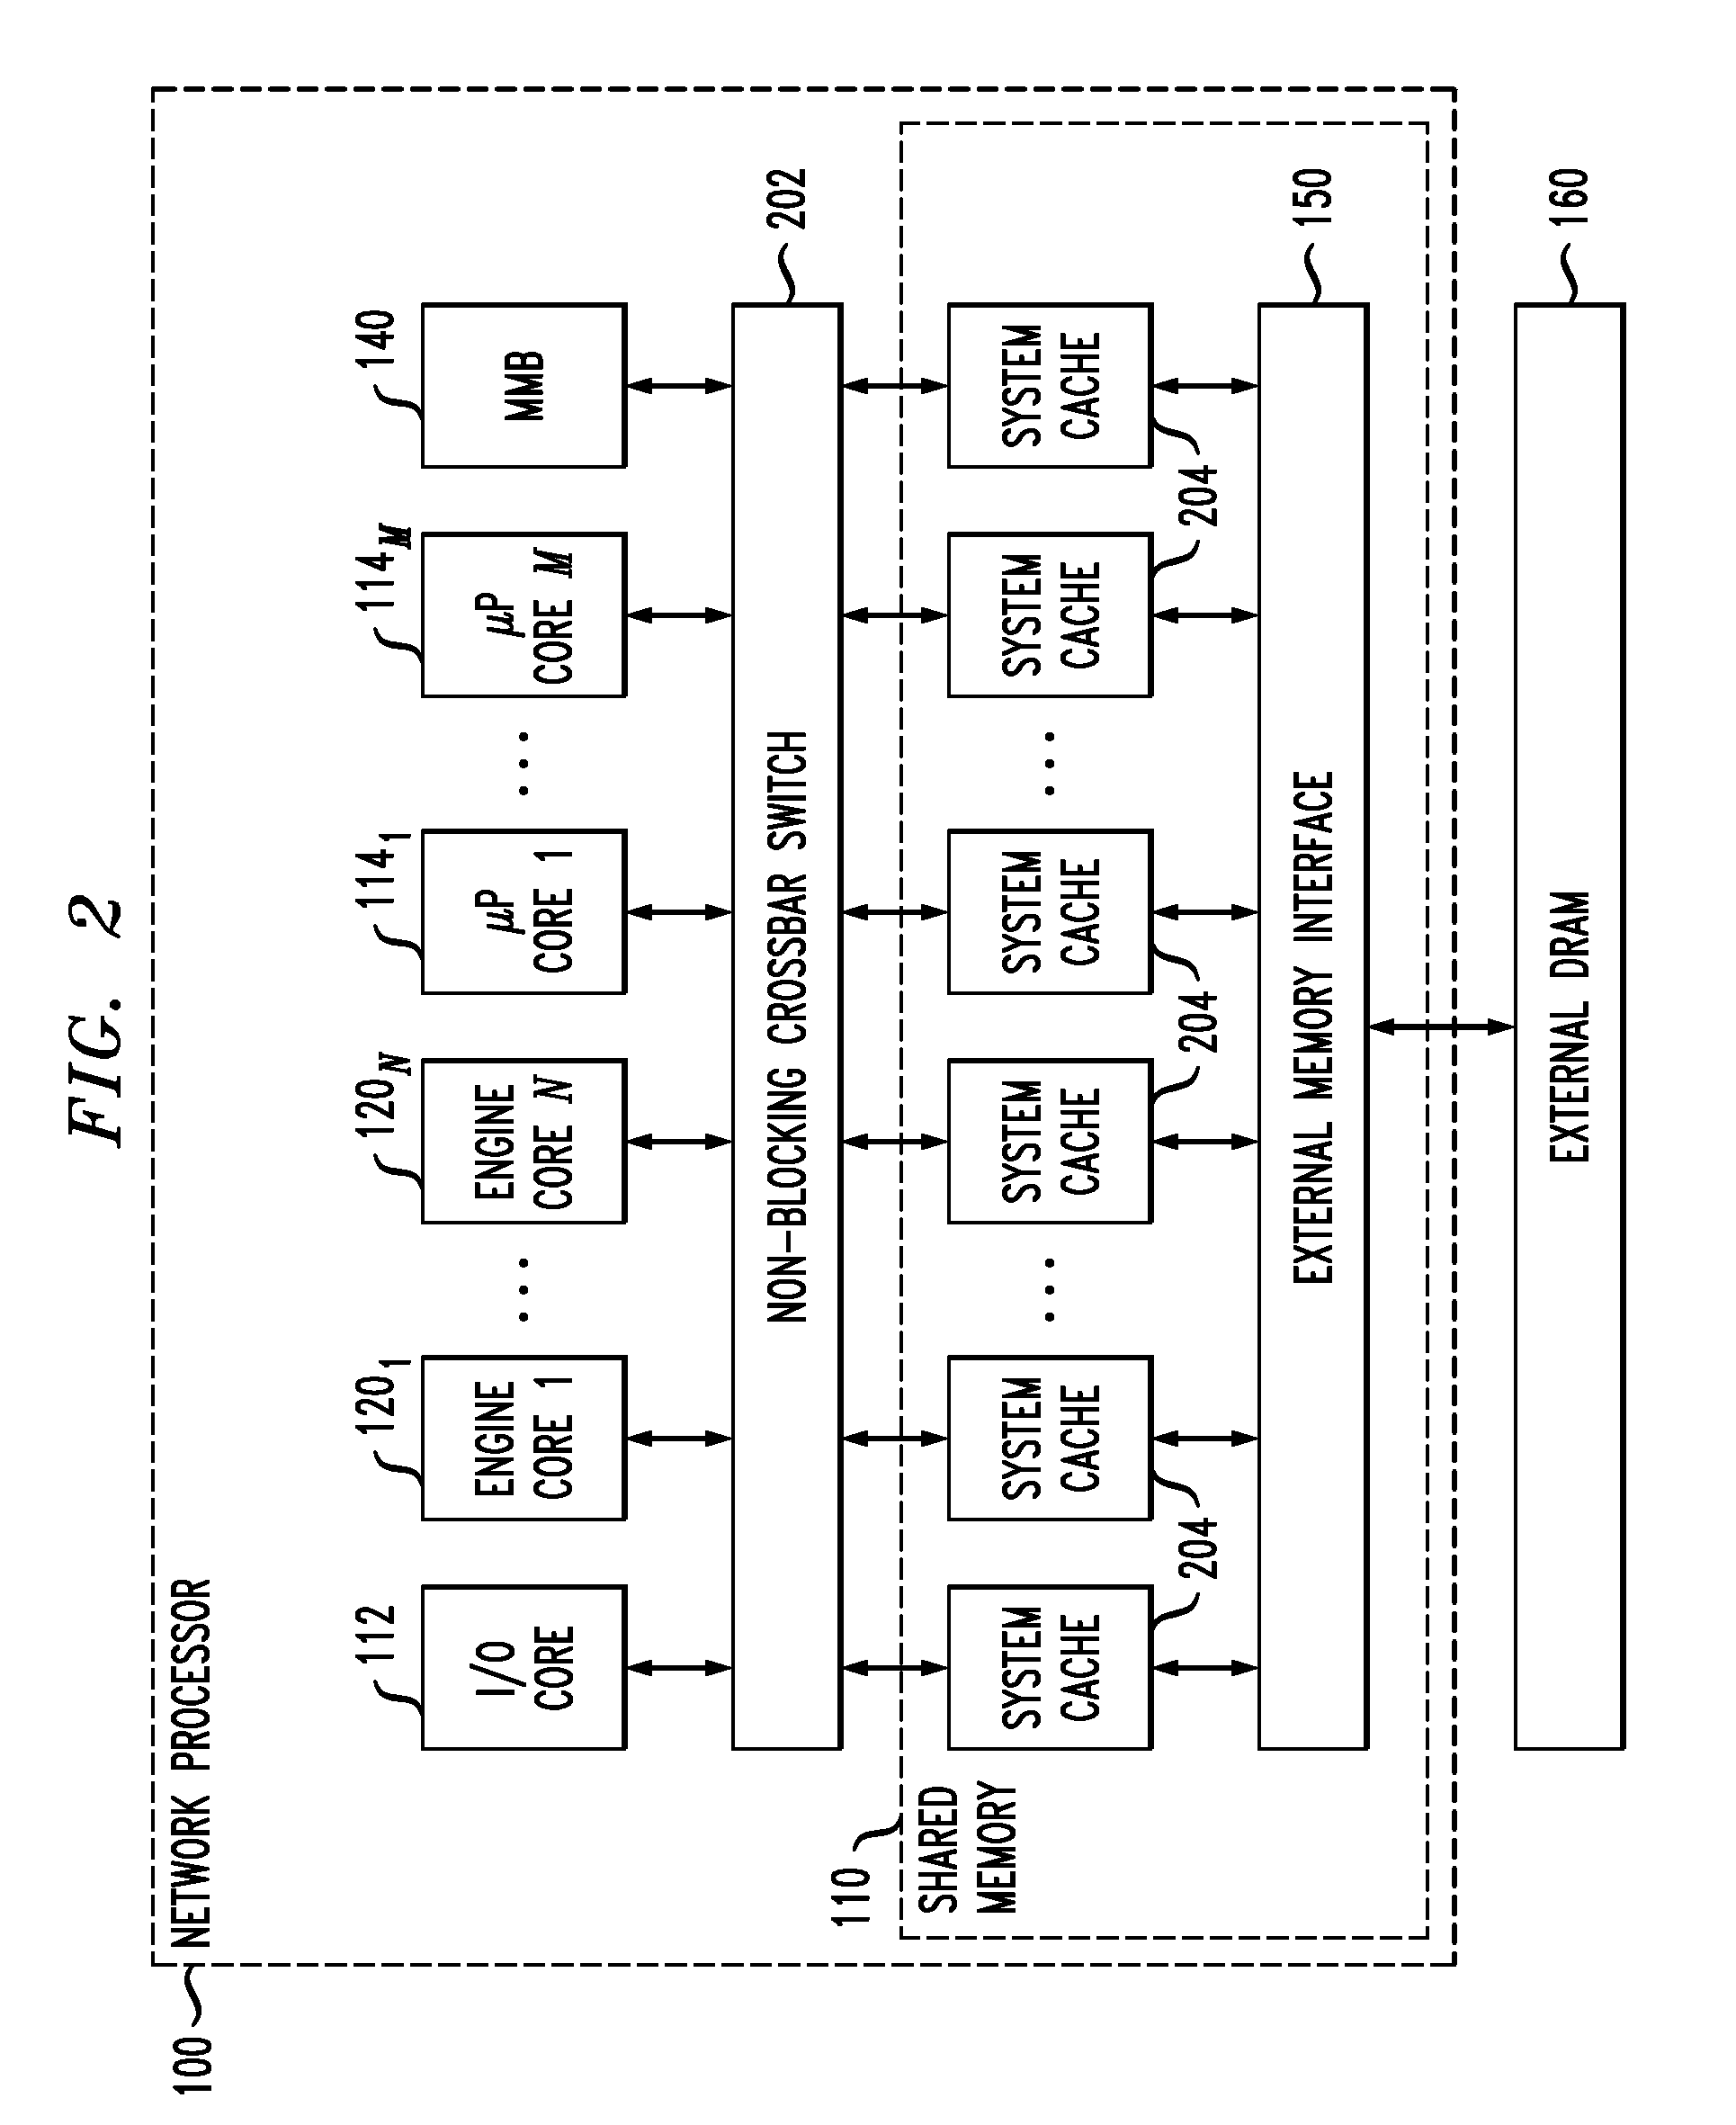 Network communications processor architecture with memory load balancing